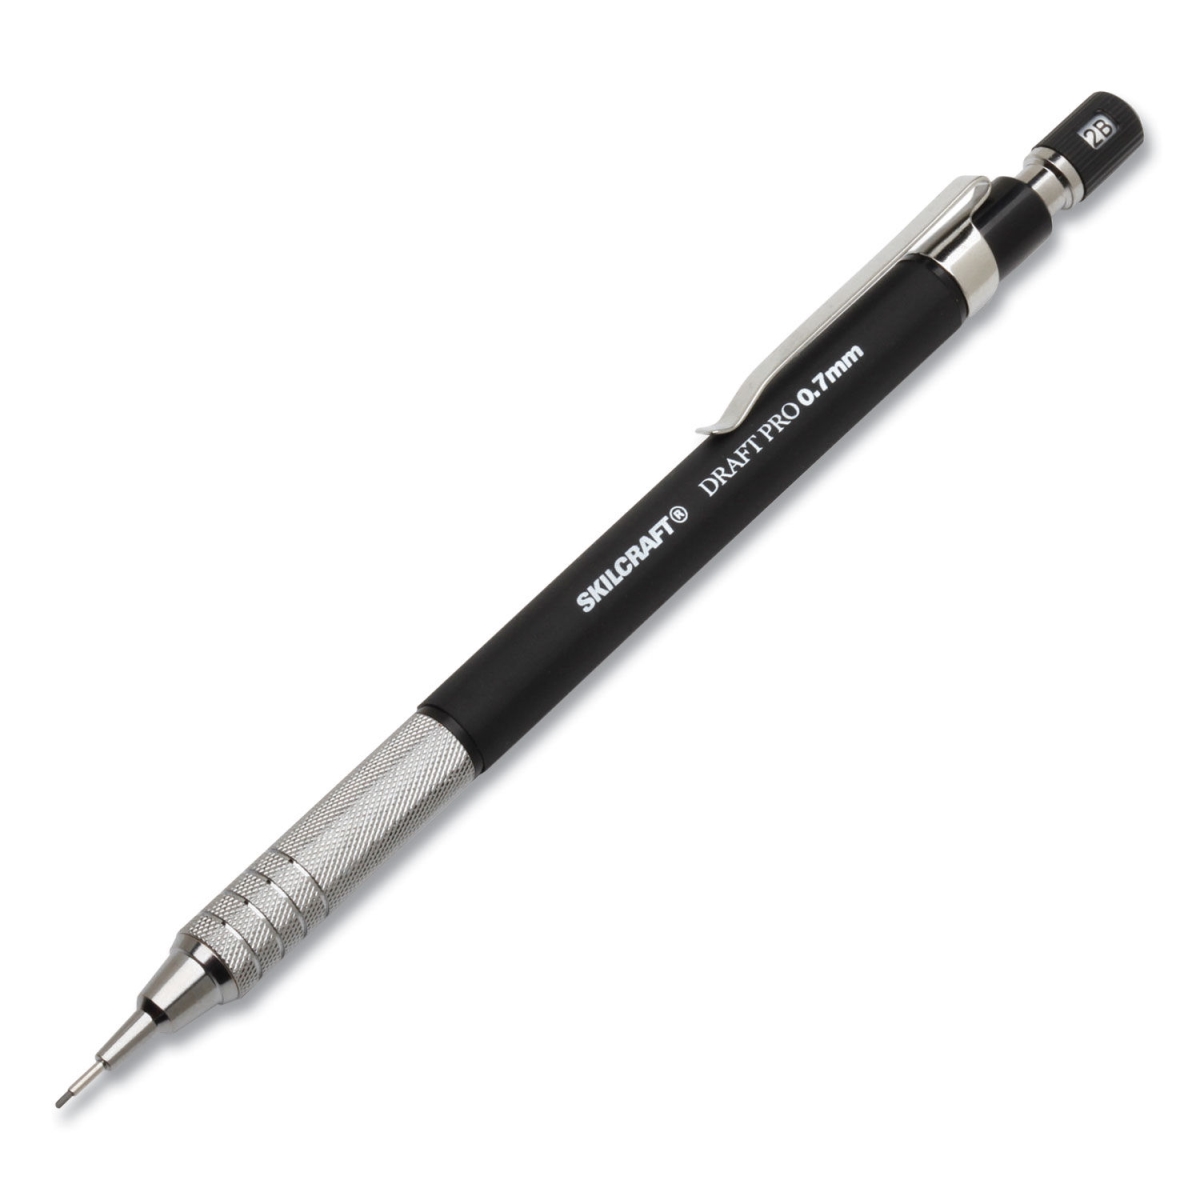 Picture of Abilityone 7520016943027 0.7 mm Skilcraft Draft Pro Mechanical Drafting Pencil